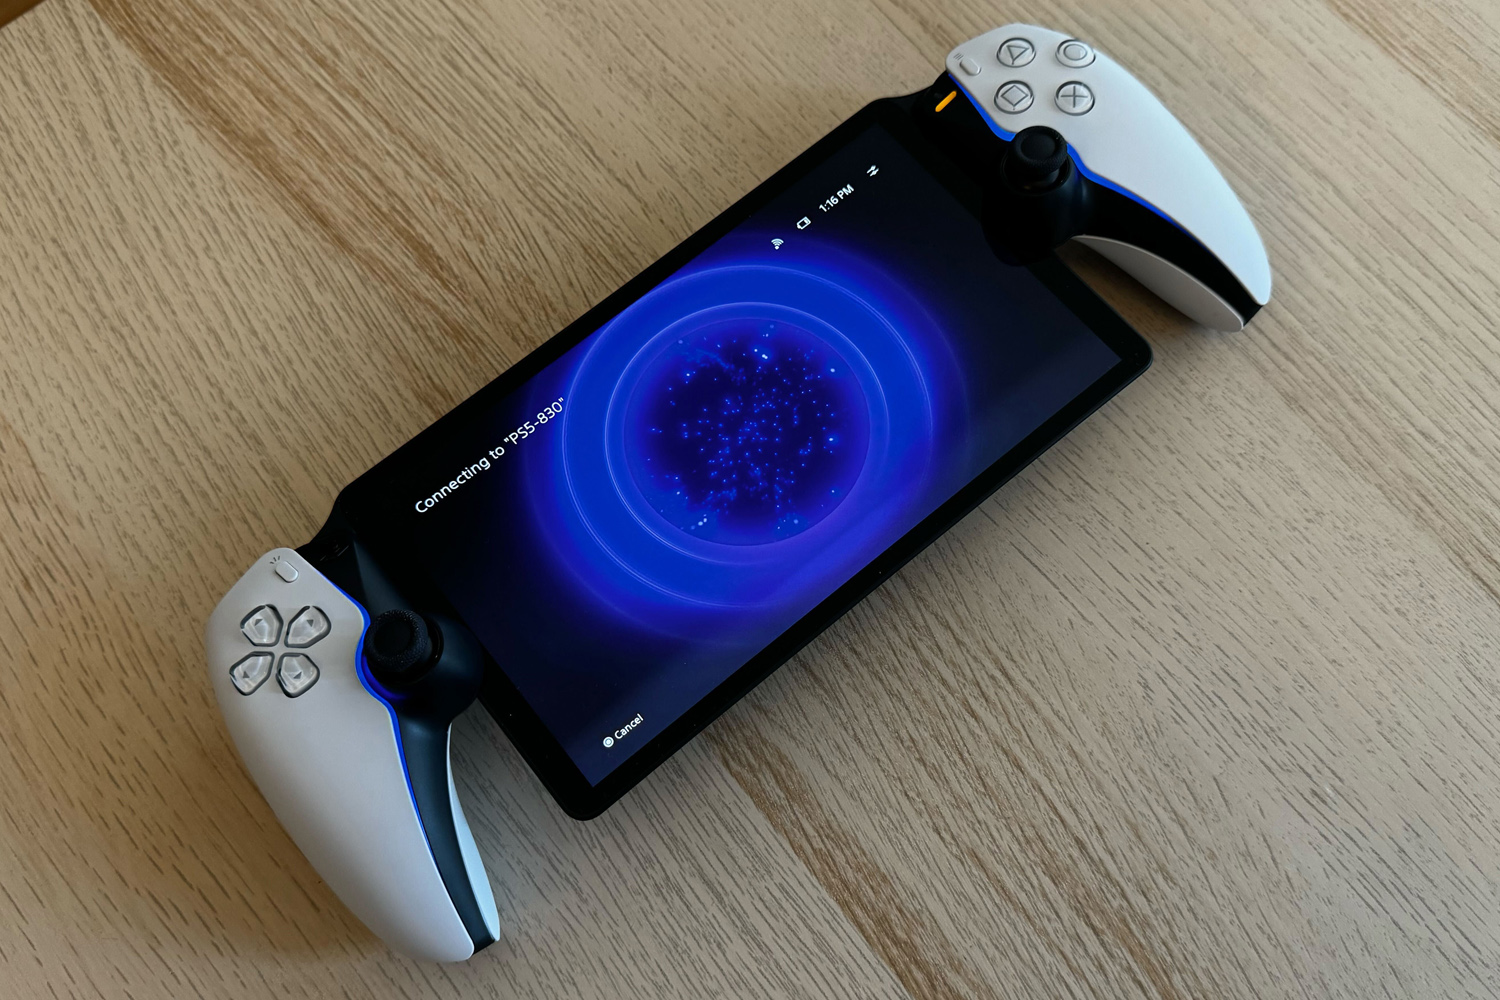 PlayStation Portal review: PS5 on the go